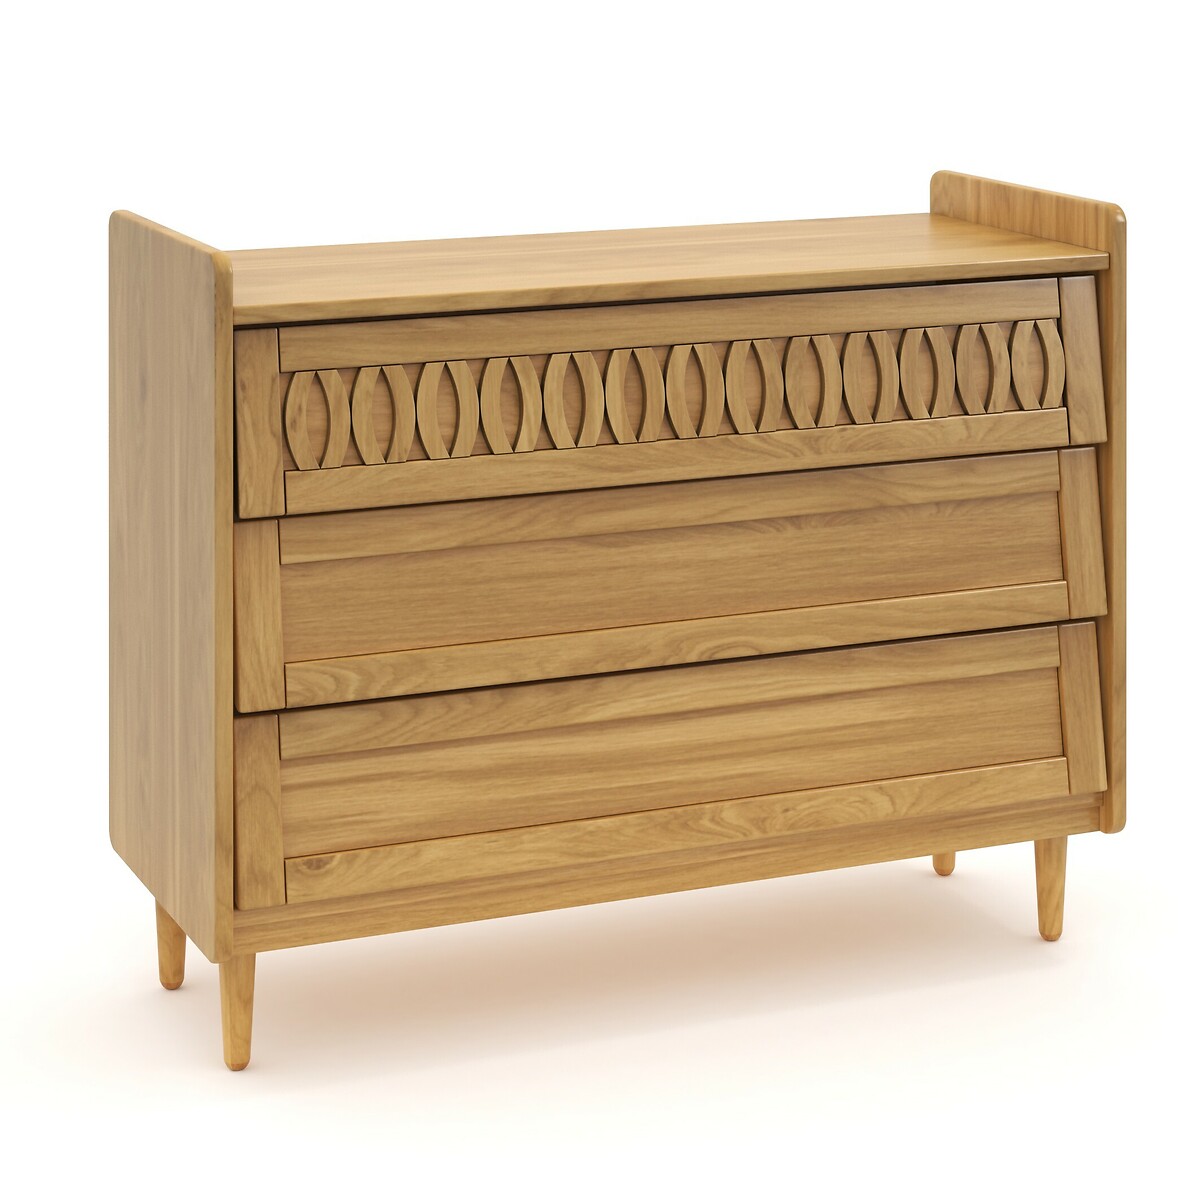 Malu Solid Pine Chest of 3 Drawers